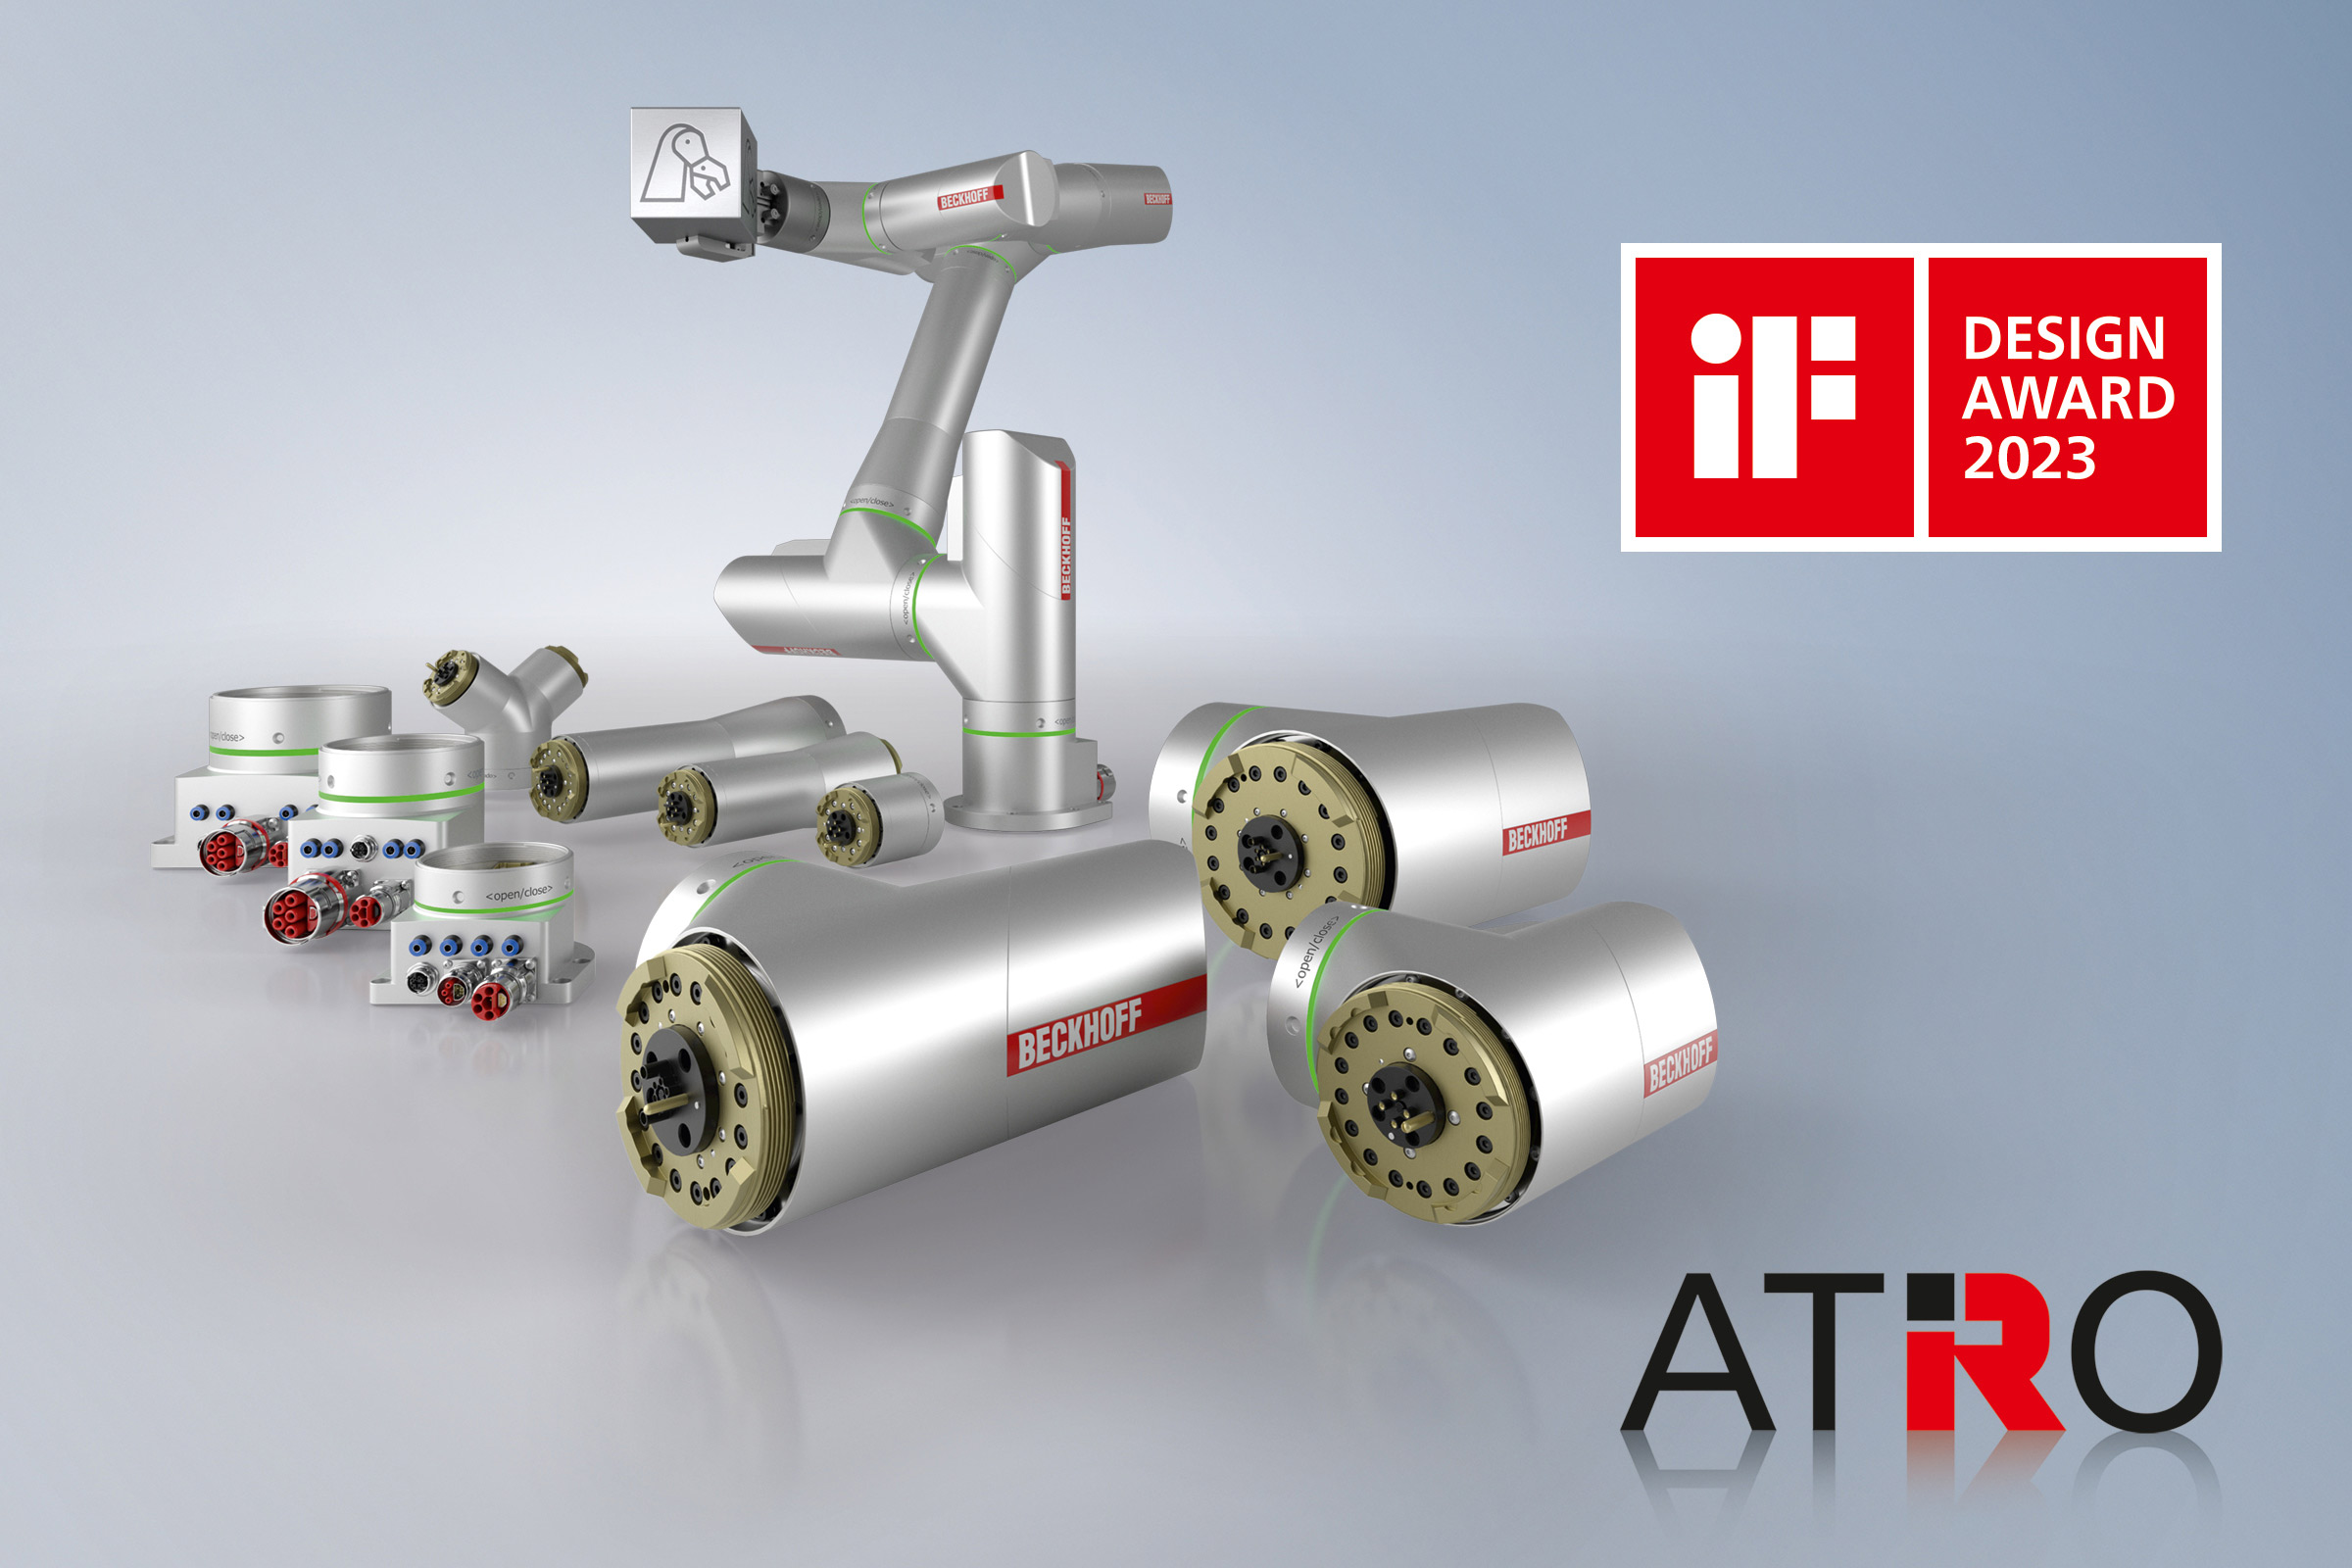 The ATRO system from Beckhoff: The complete machine, fully automated. 